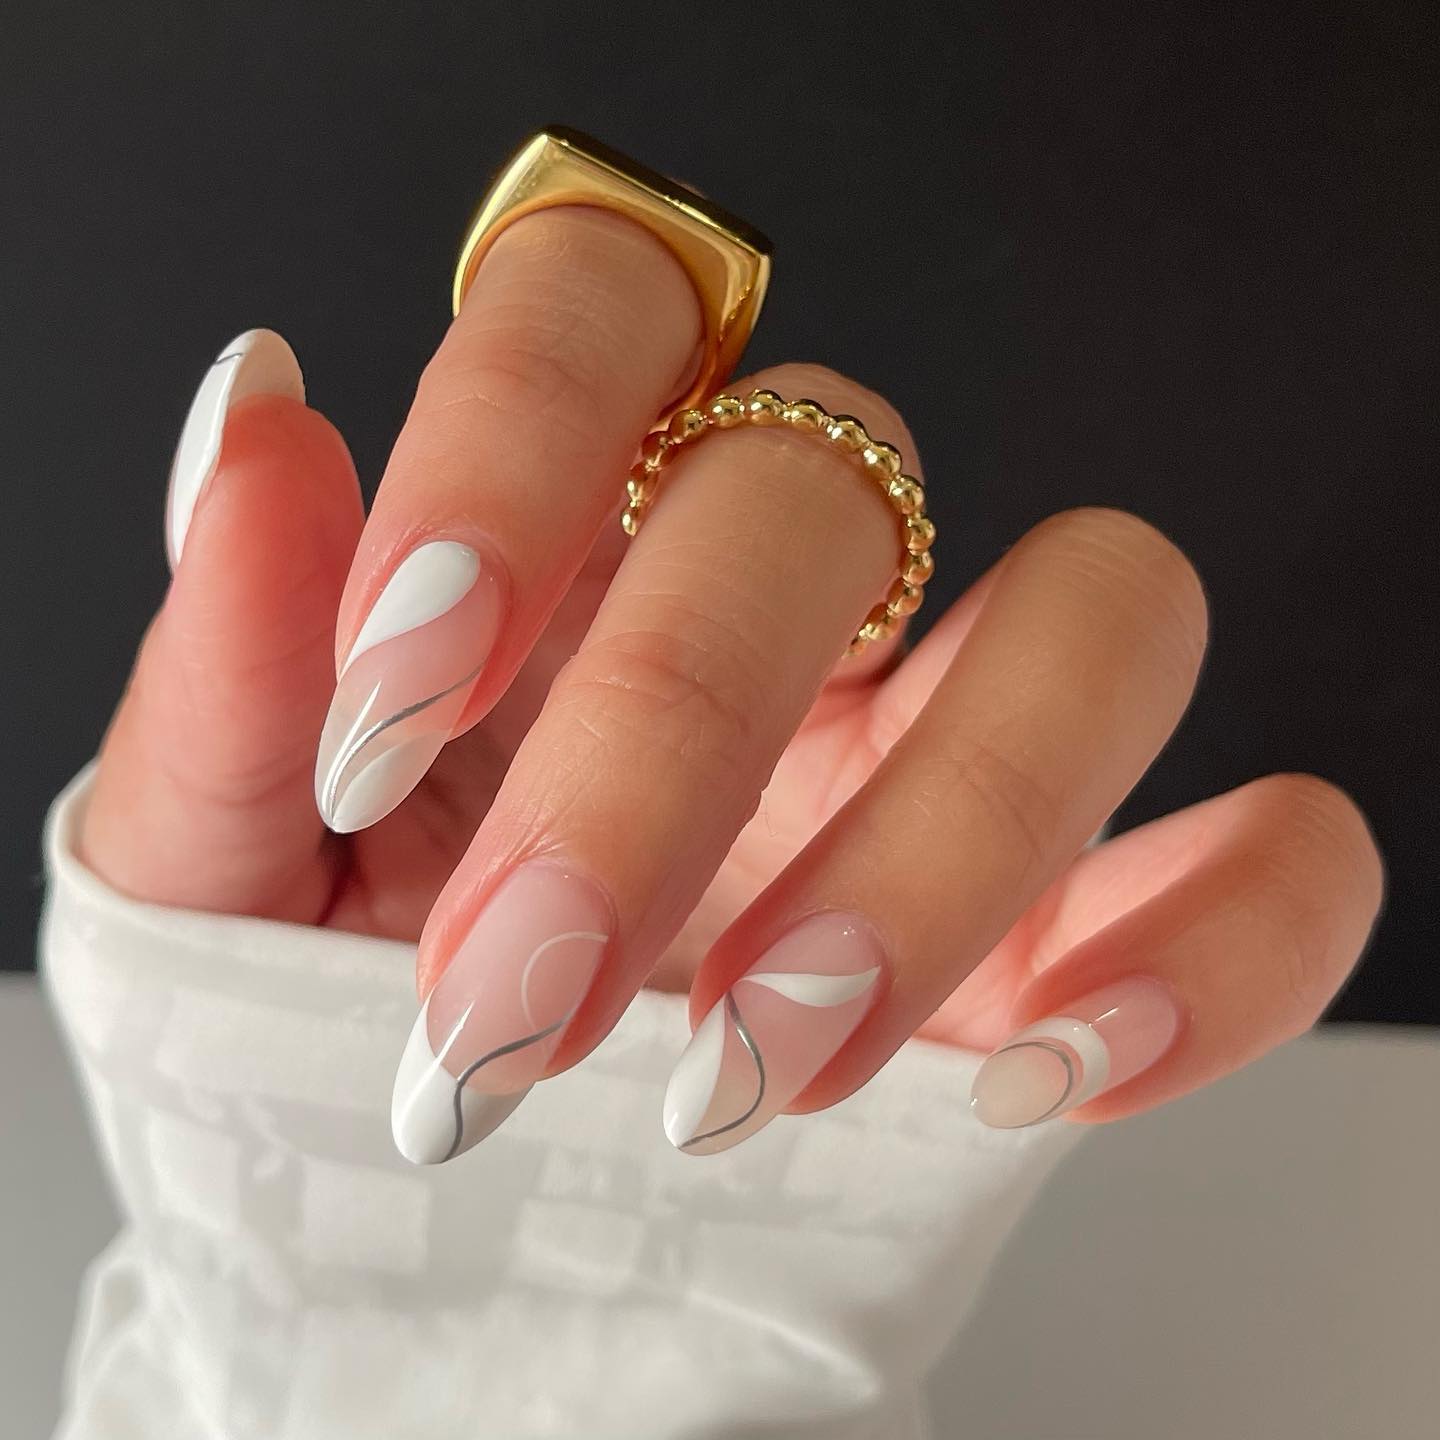 White Almond Manicures 4